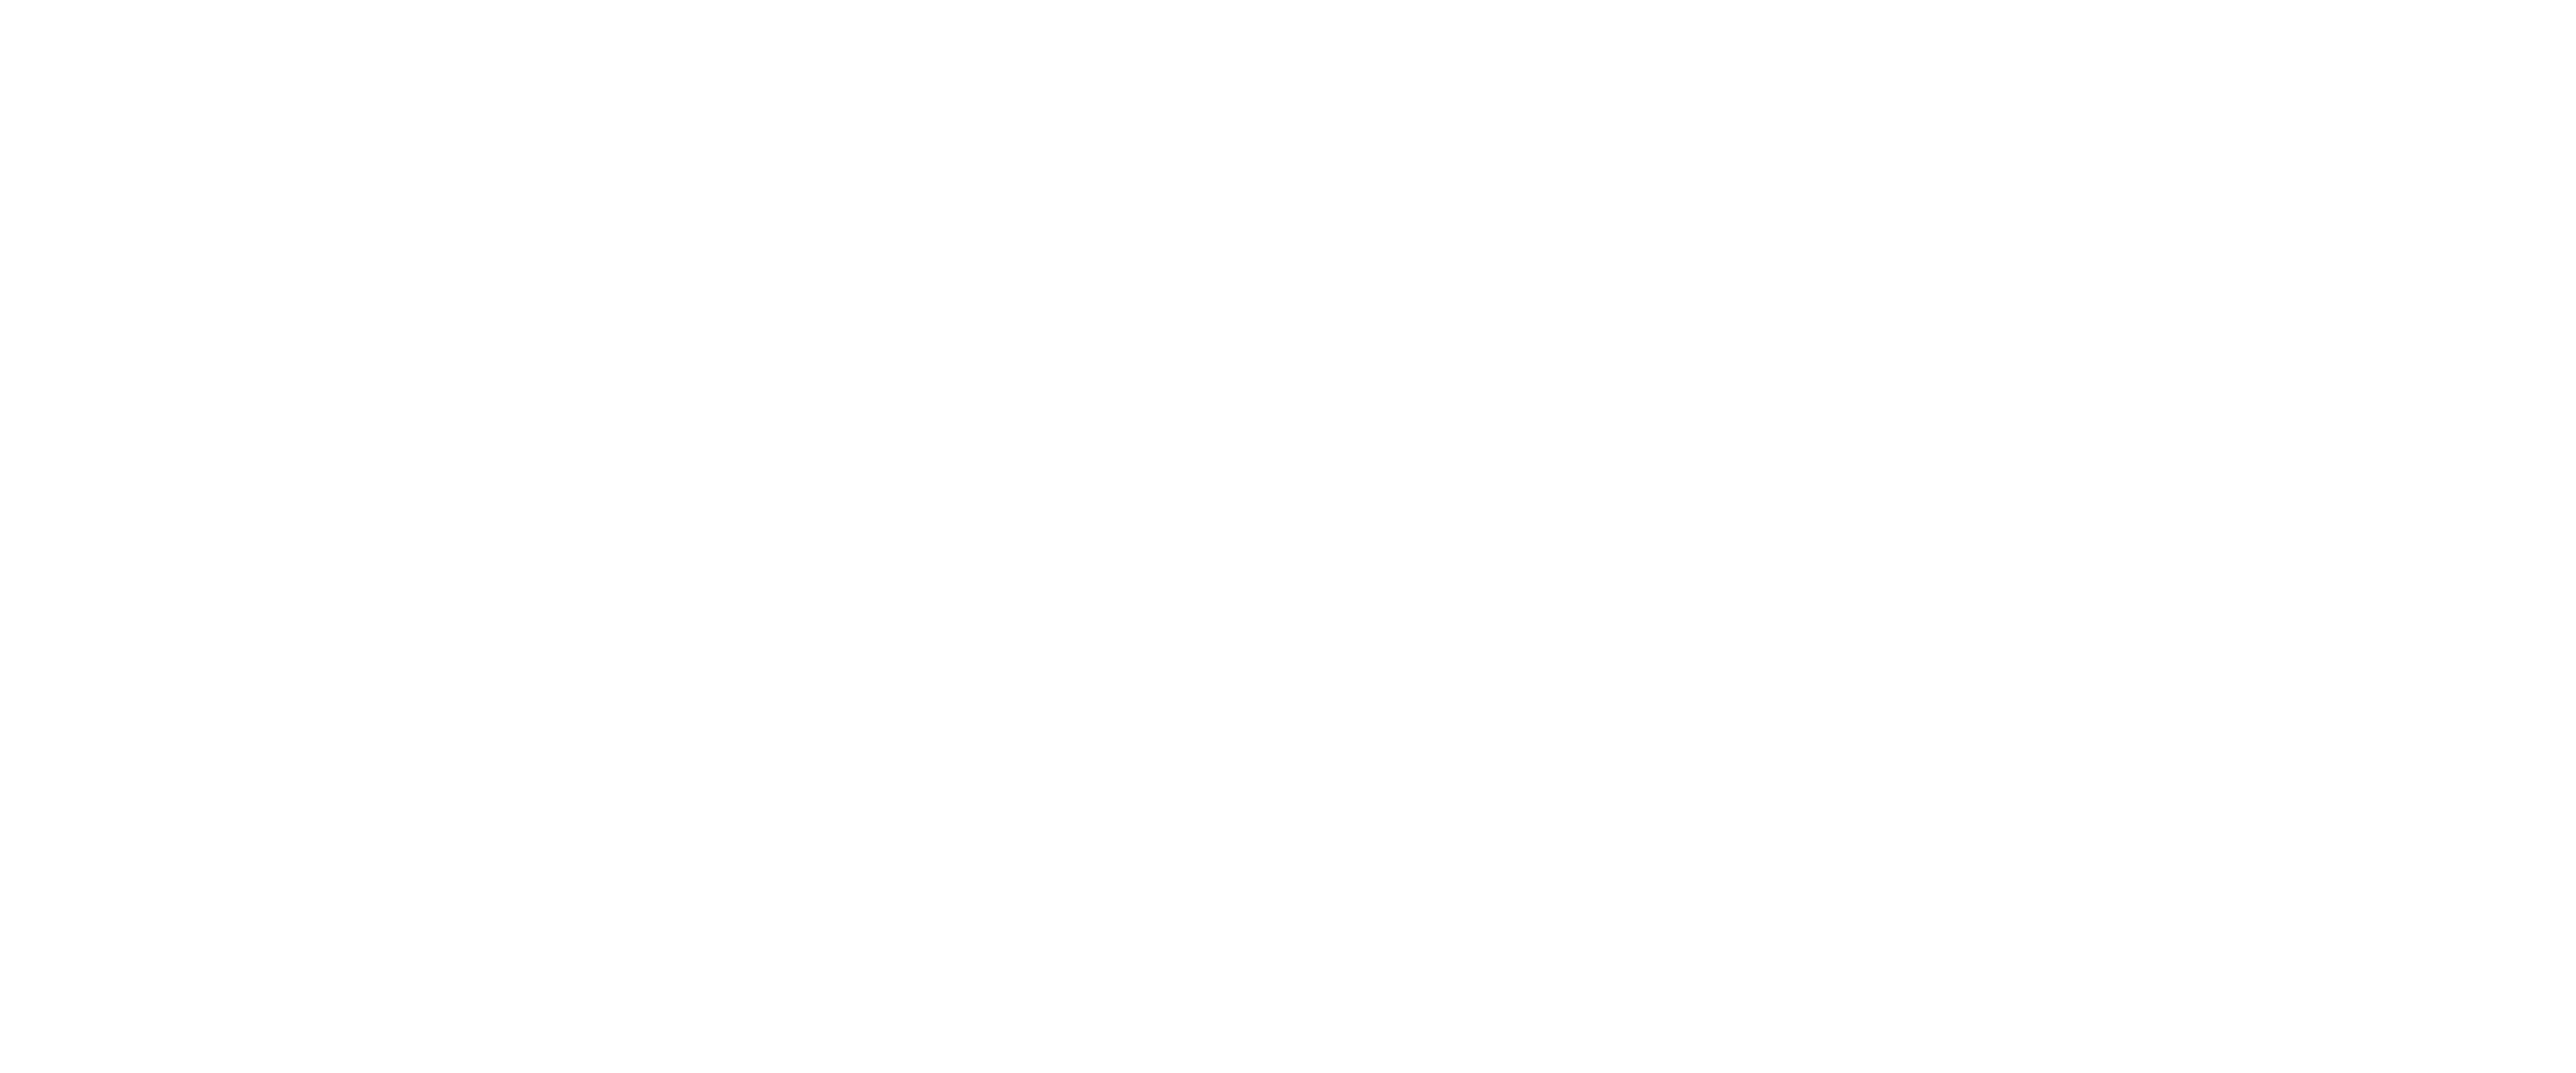 Collective Service